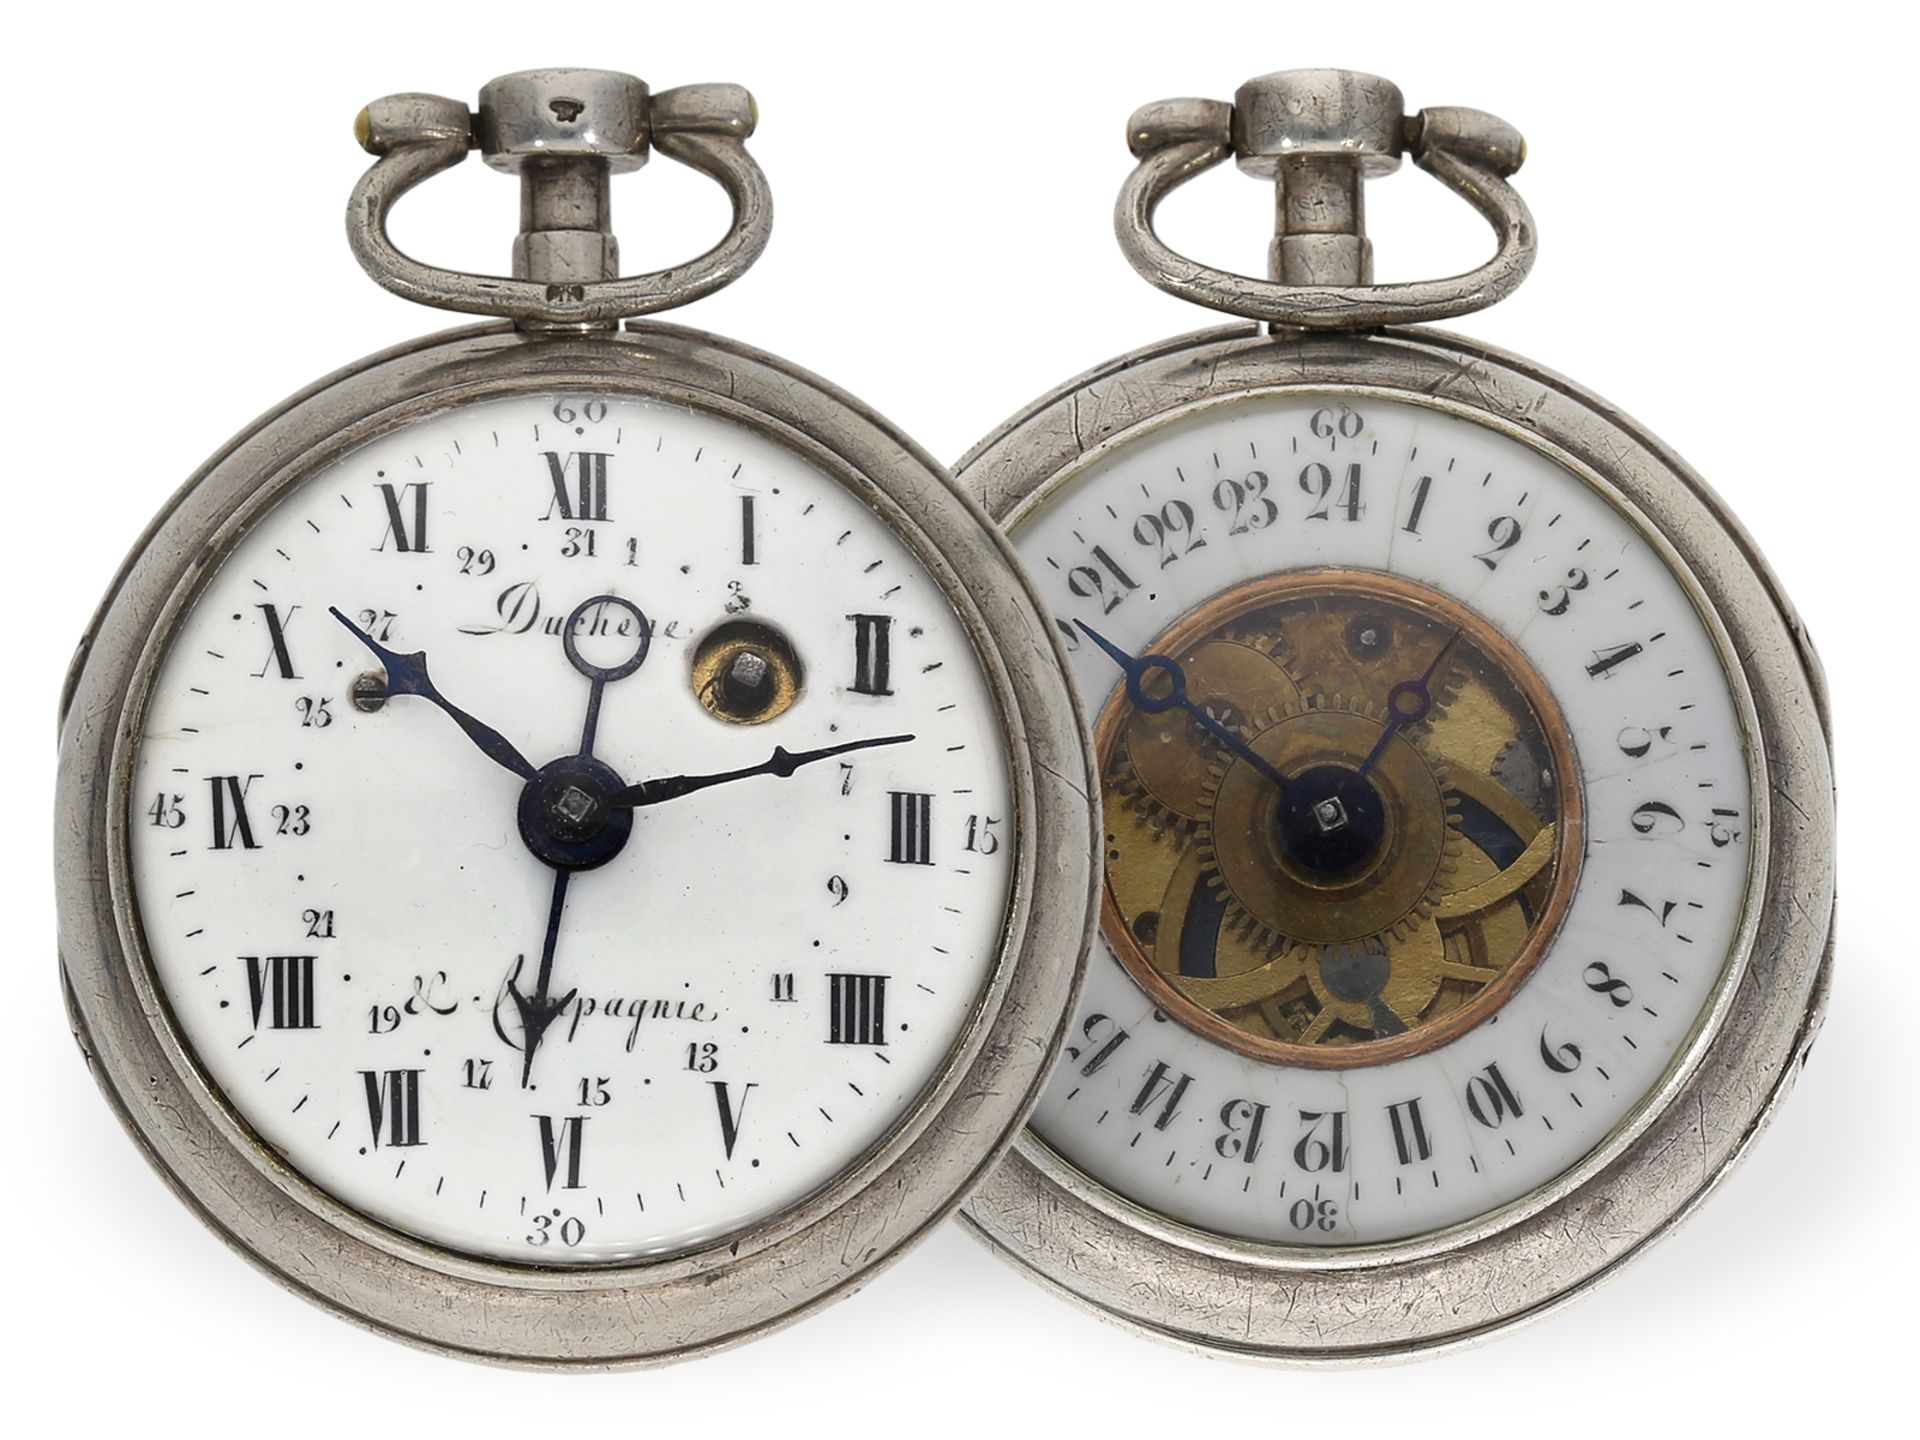 Pocket watch: extremely rare double-sided pocket watch with 24h dial, 2nd time zone, date, 1780